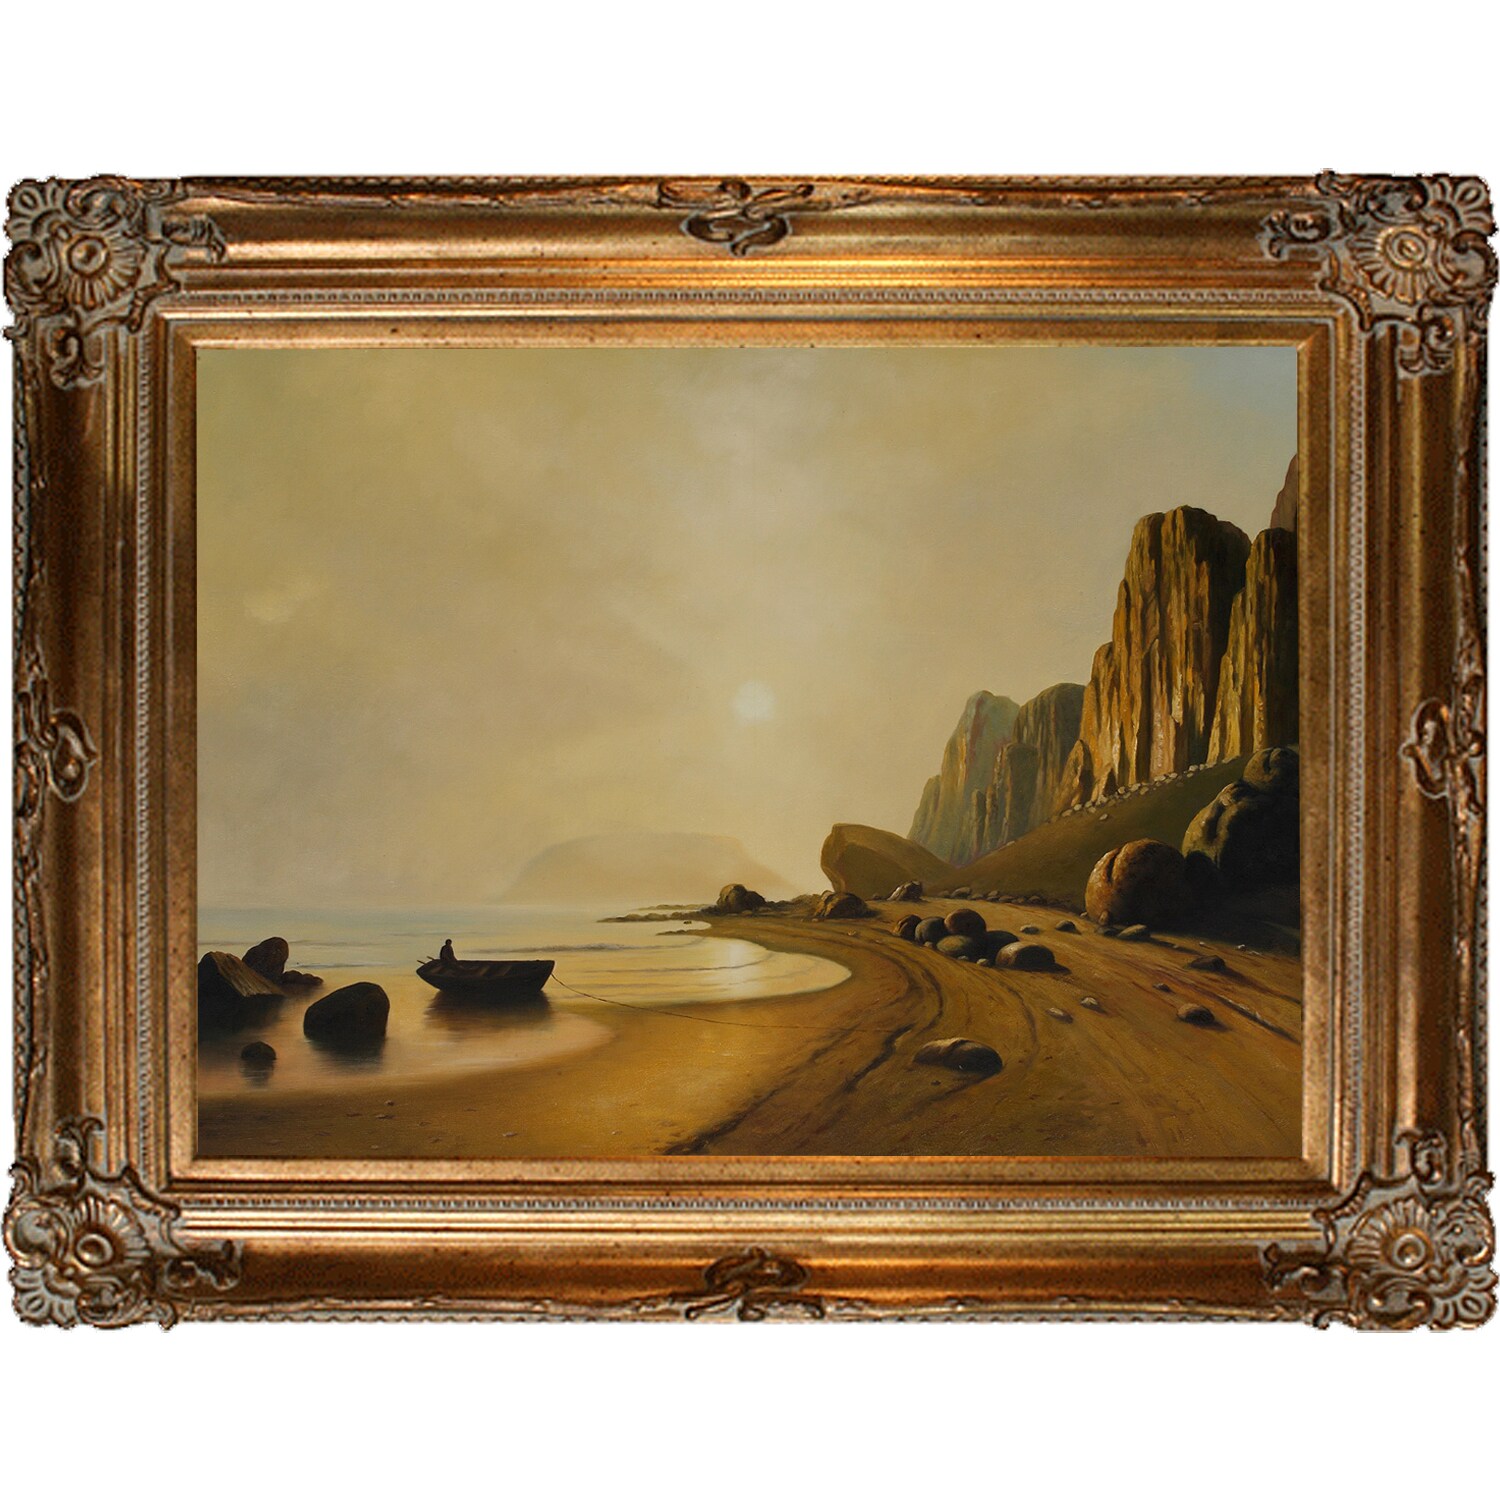 Sunset Calm in the Bay of Fundy Hand painted Canvas Art 